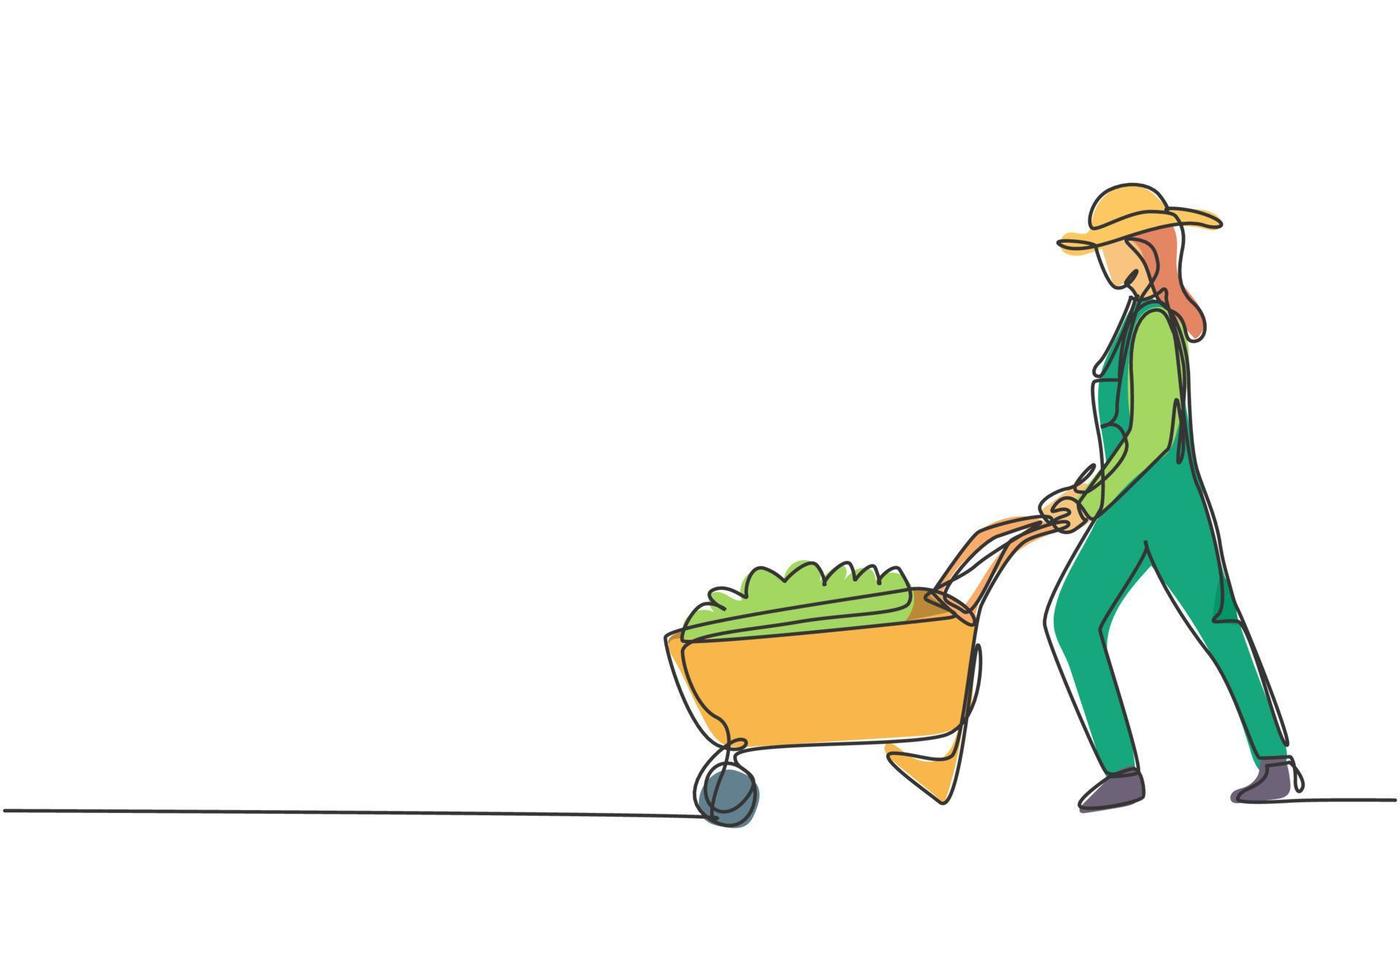 Continuous one line drawing young female farmer pushes the wheelbarrow trolley filled with fruits. A successful harvest activity minimalist concept. Single line draw design vector graphic illustration